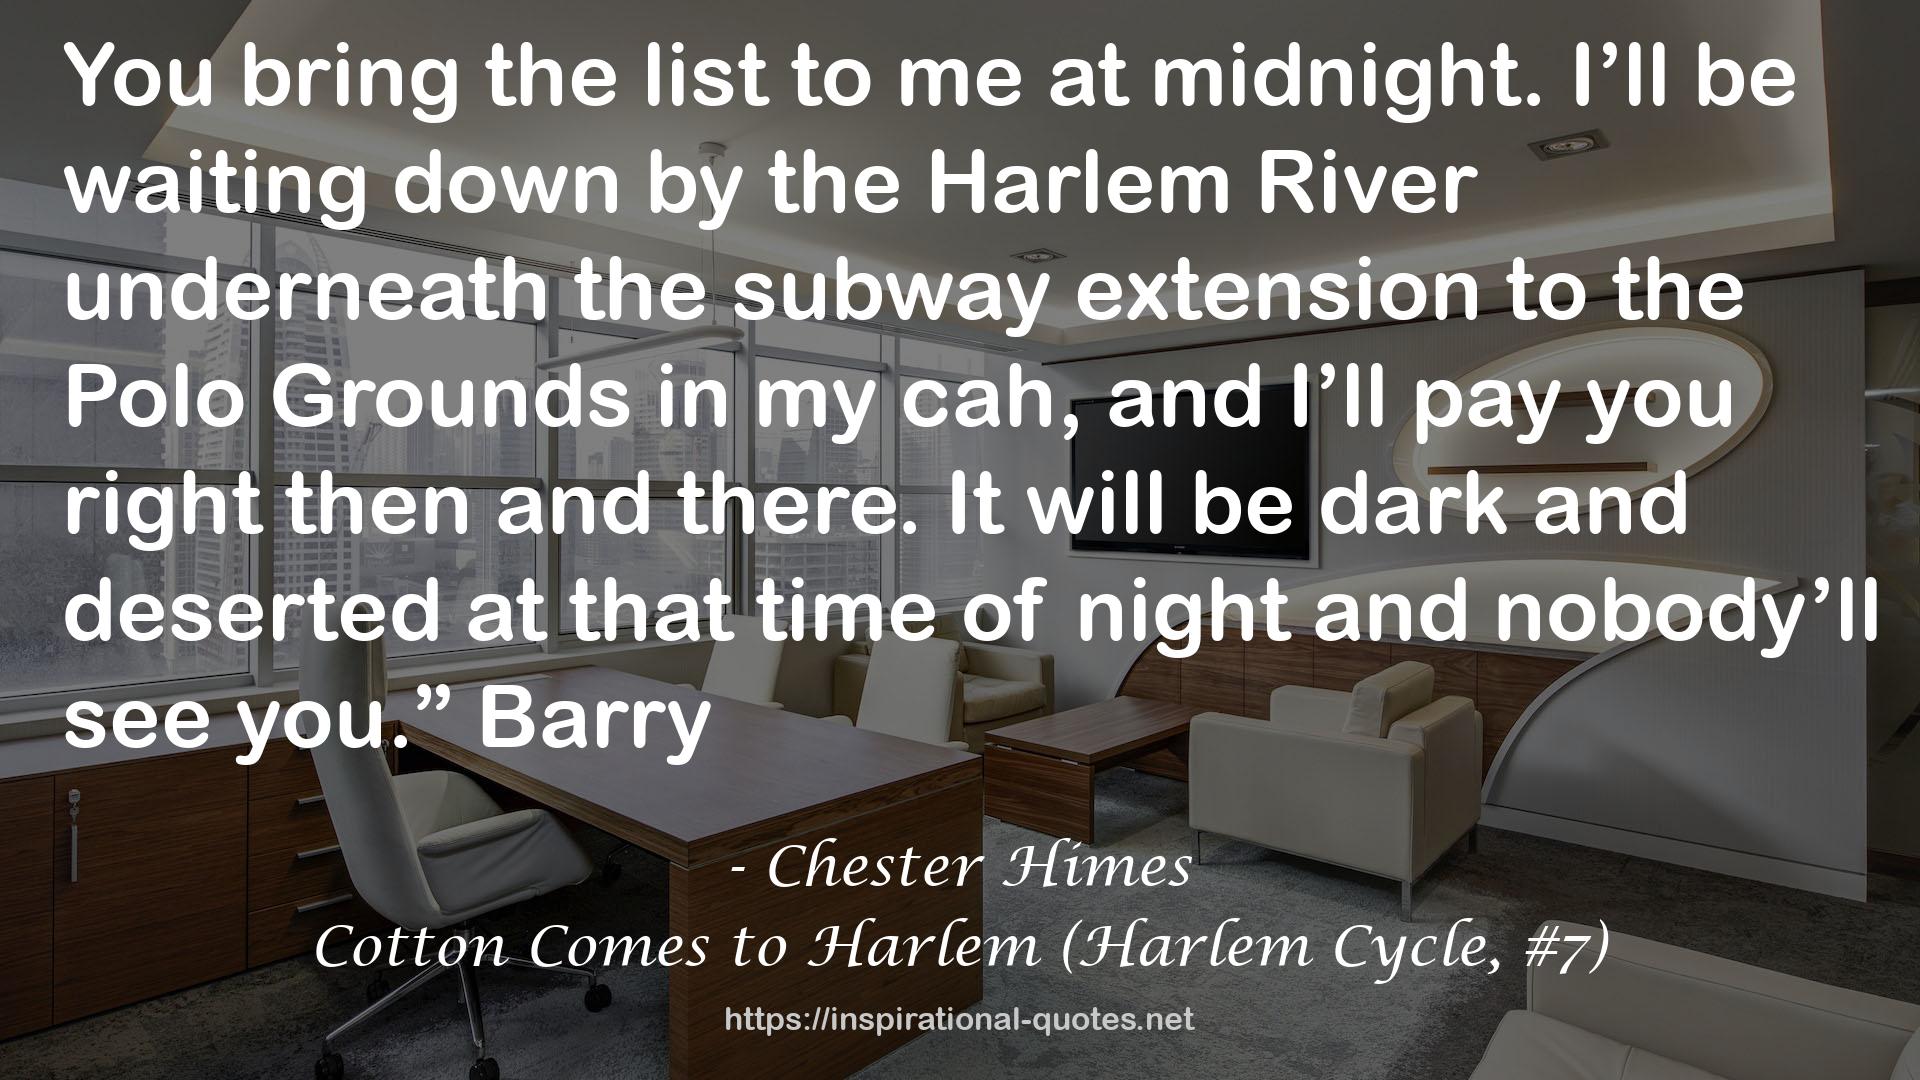 Cotton Comes to Harlem (Harlem Cycle, #7) QUOTES